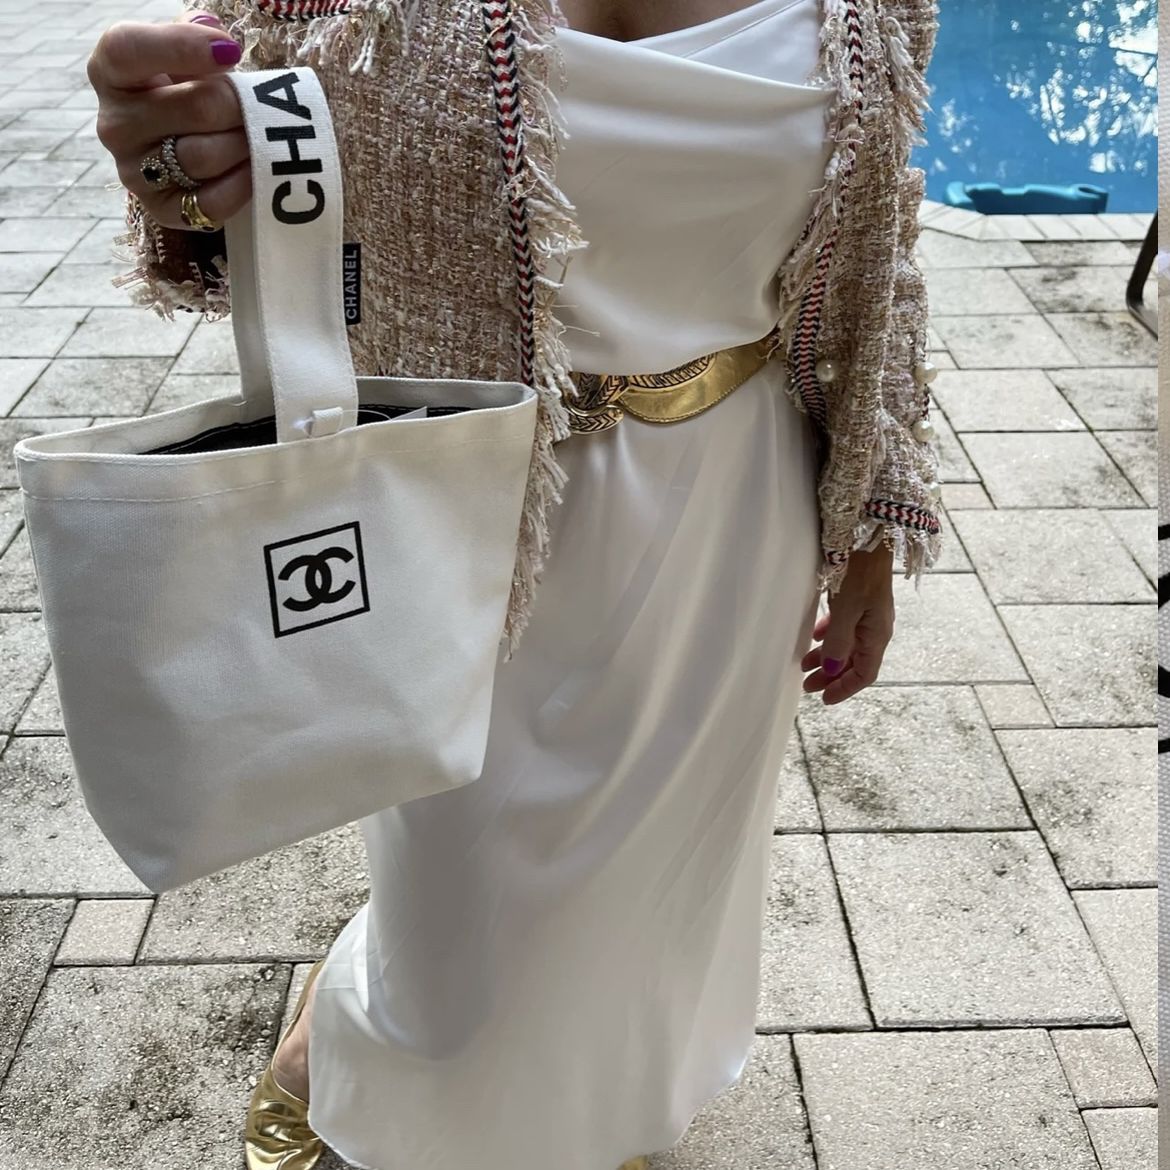 Chanel VIP mesh beach tote for Sale in Queens, NY - OfferUp